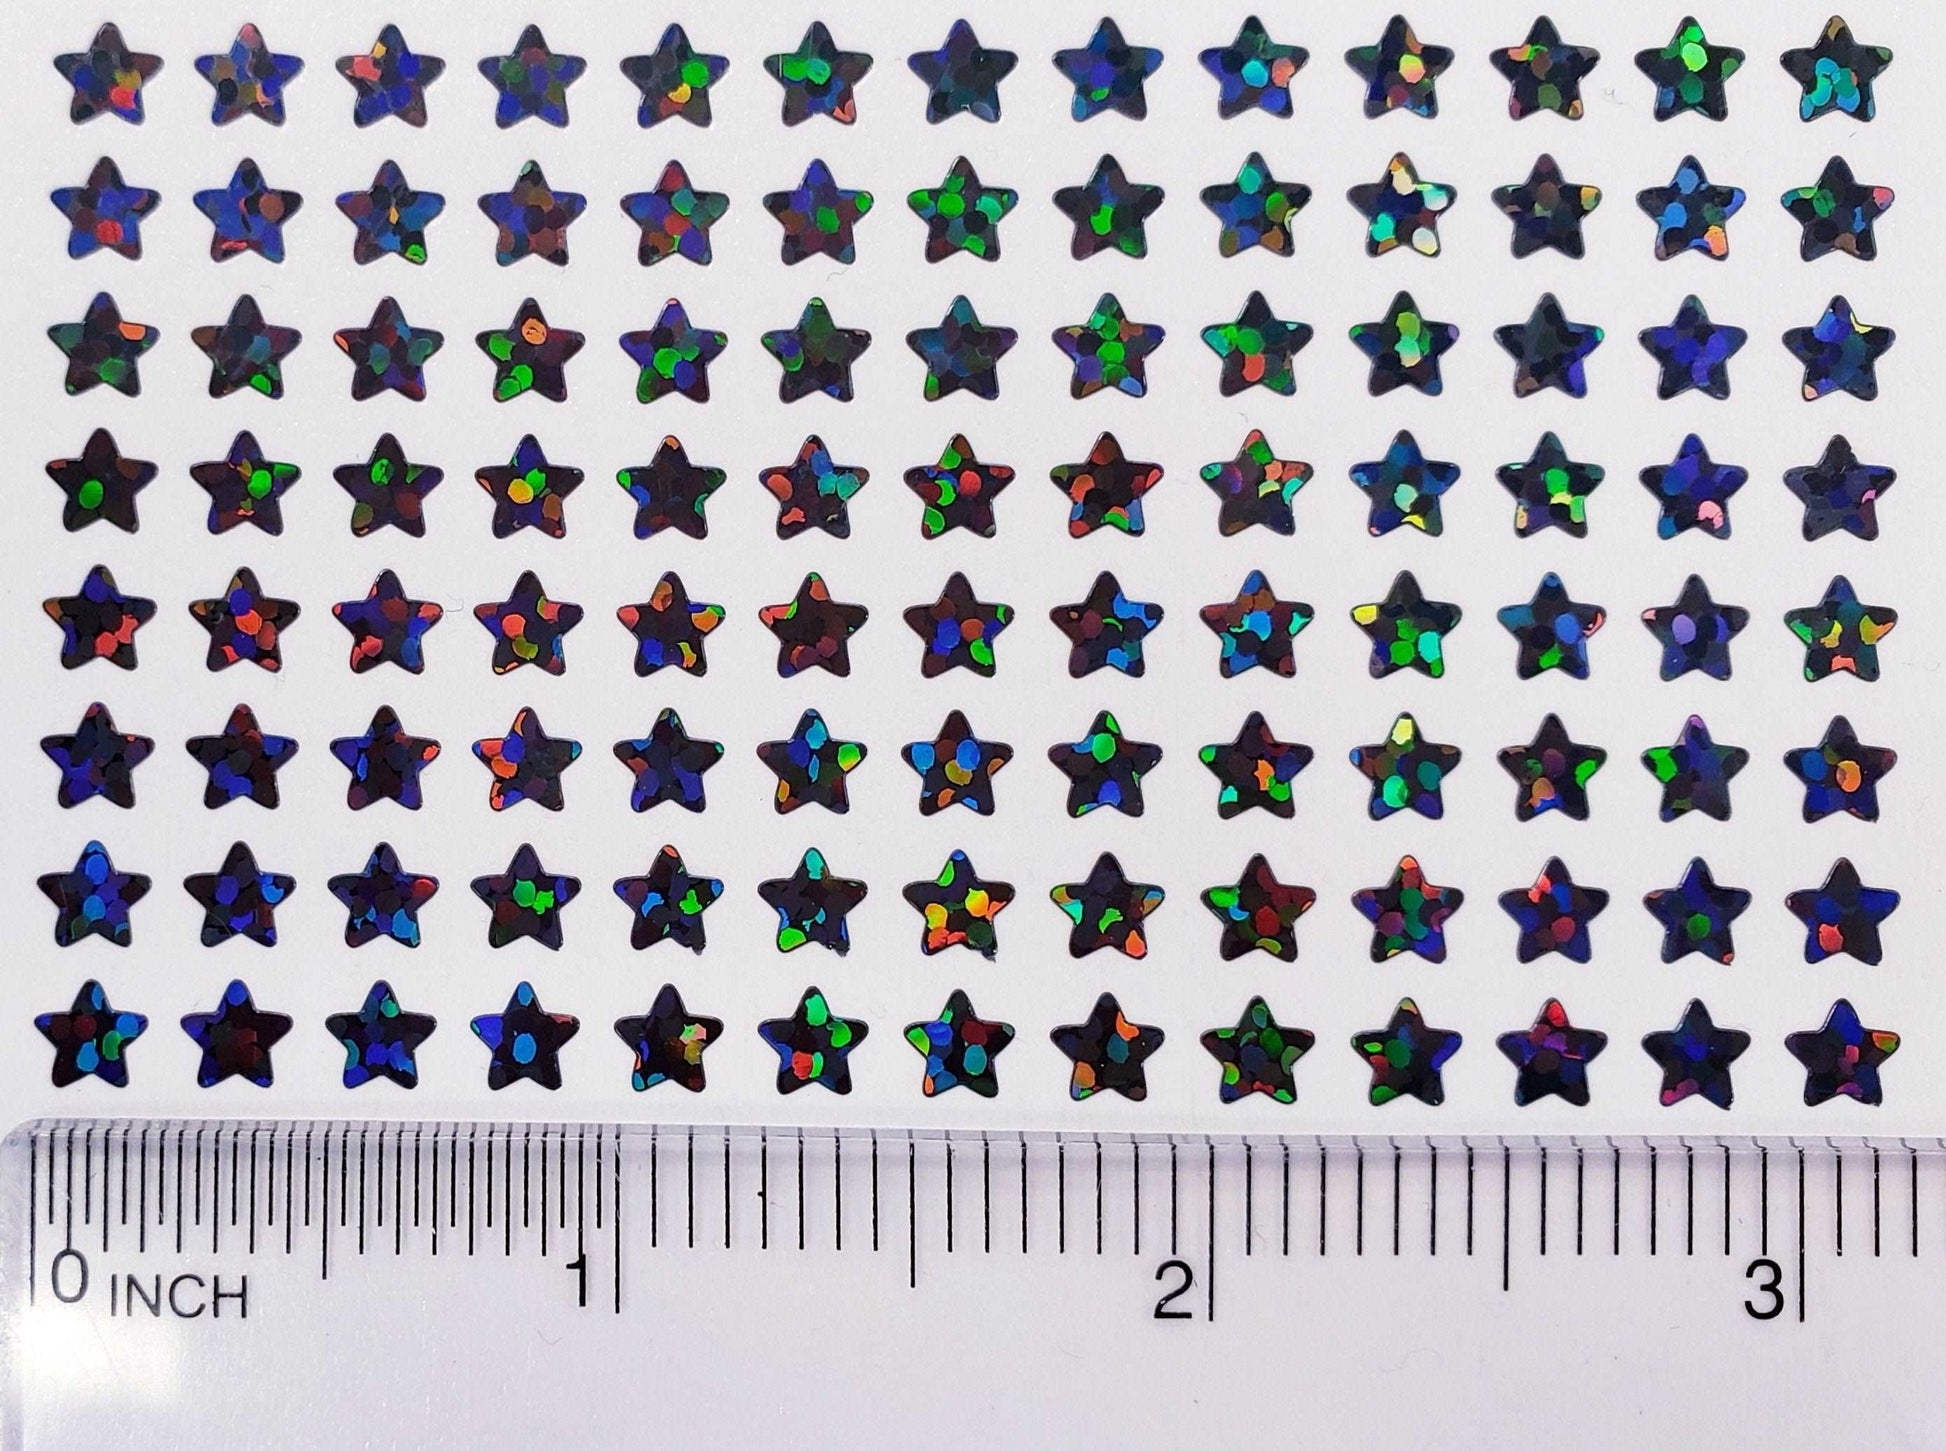 Extra Small Star Stickers, set of 490 black holo deco glitter star stickers for journals, notebooks, toploader card sleeves and planners.